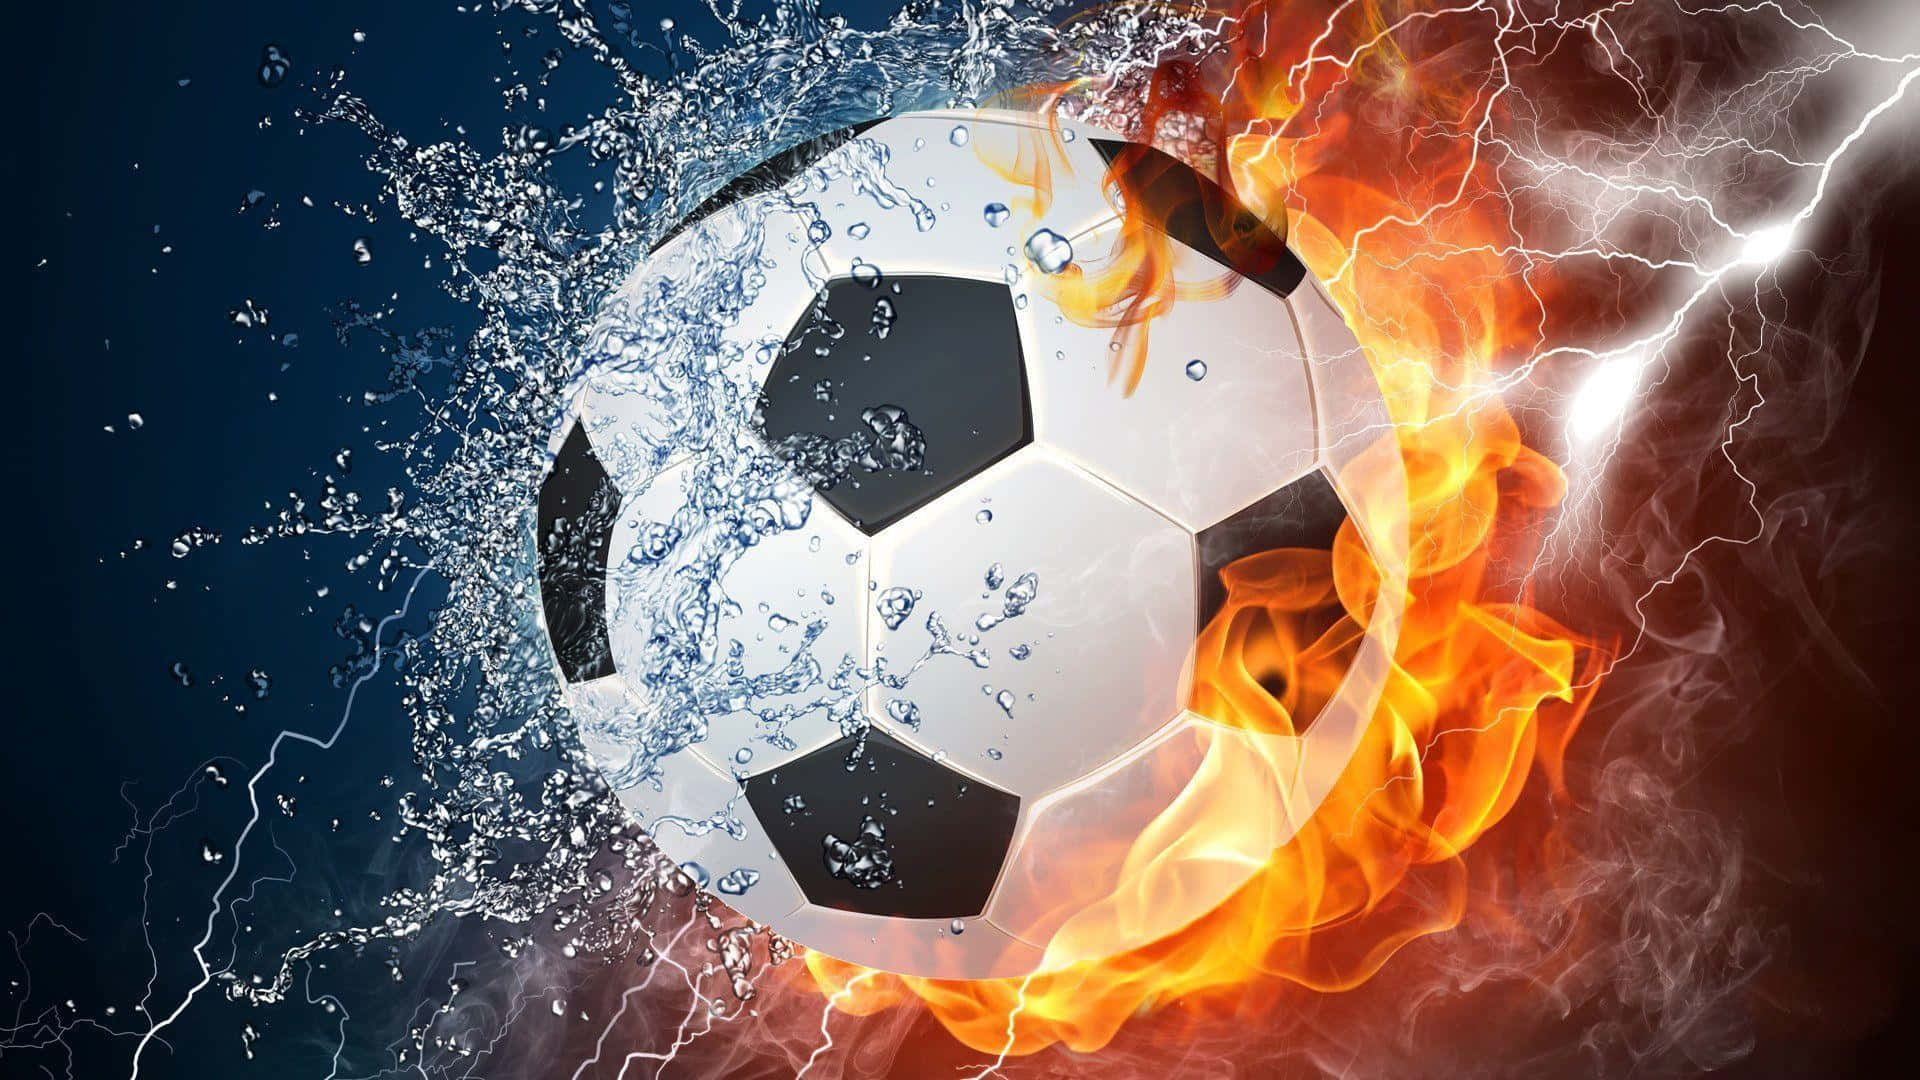 100+] Football On Fire Wallpapers